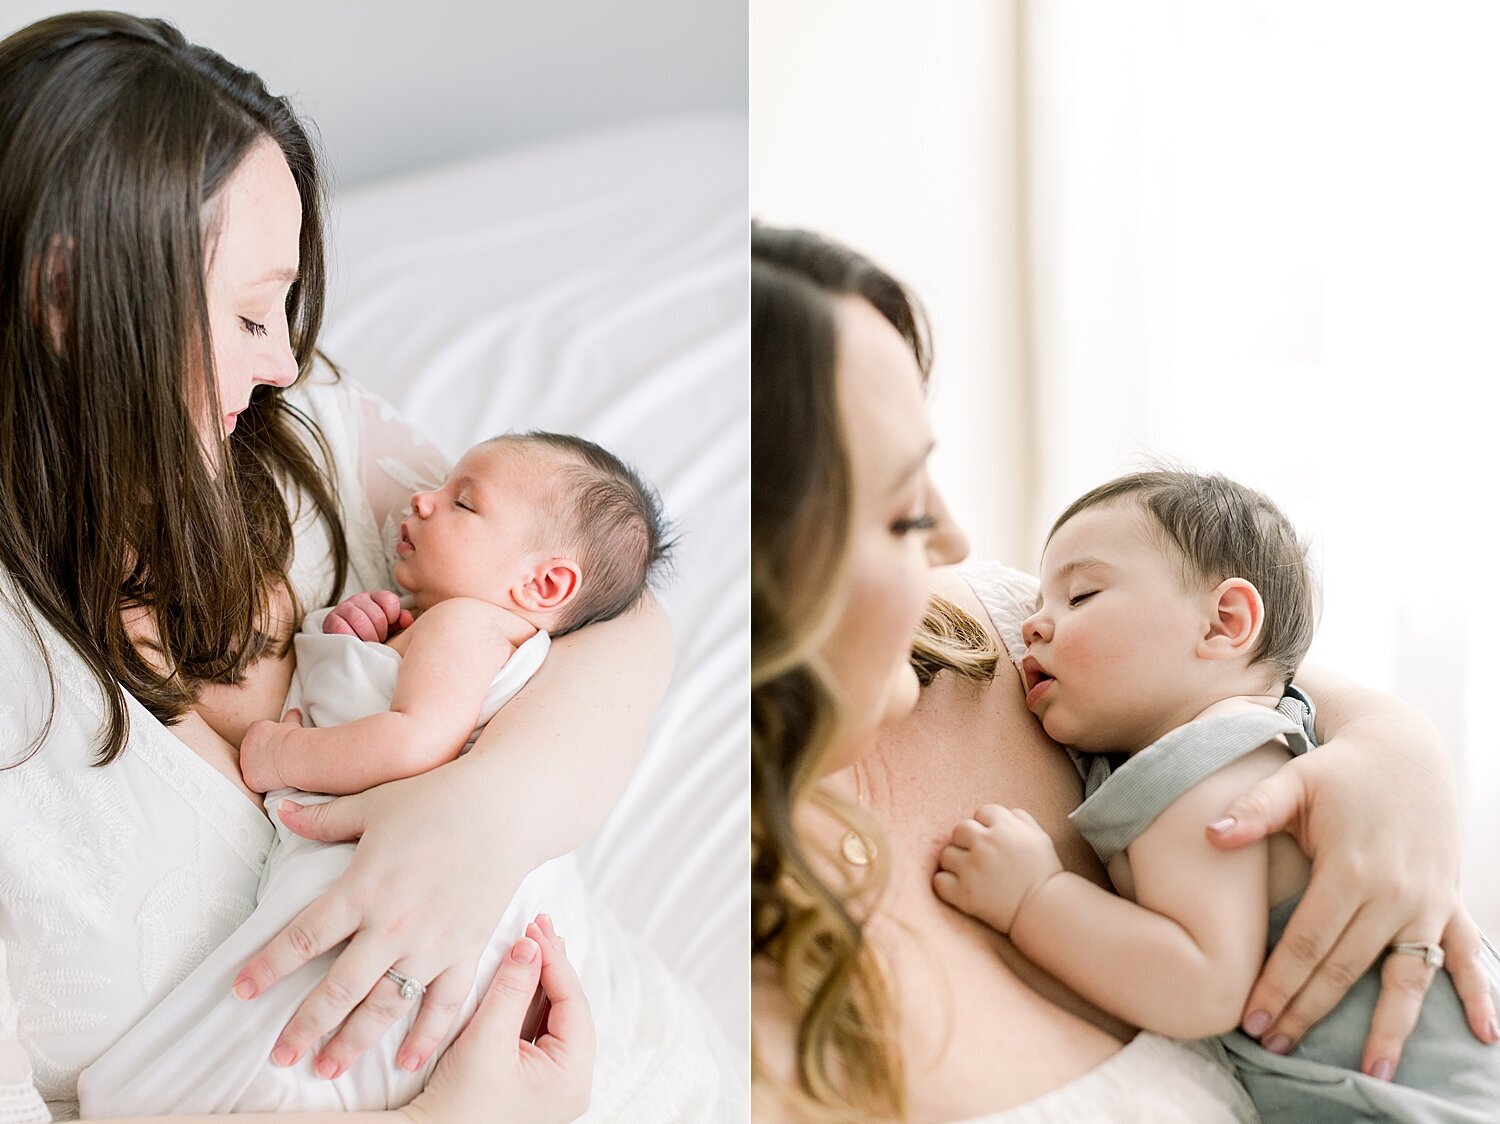 Side by side photo of baby at his newborn session and then 6 months later at a milestone session. Photos by Ambre Williams Photography.